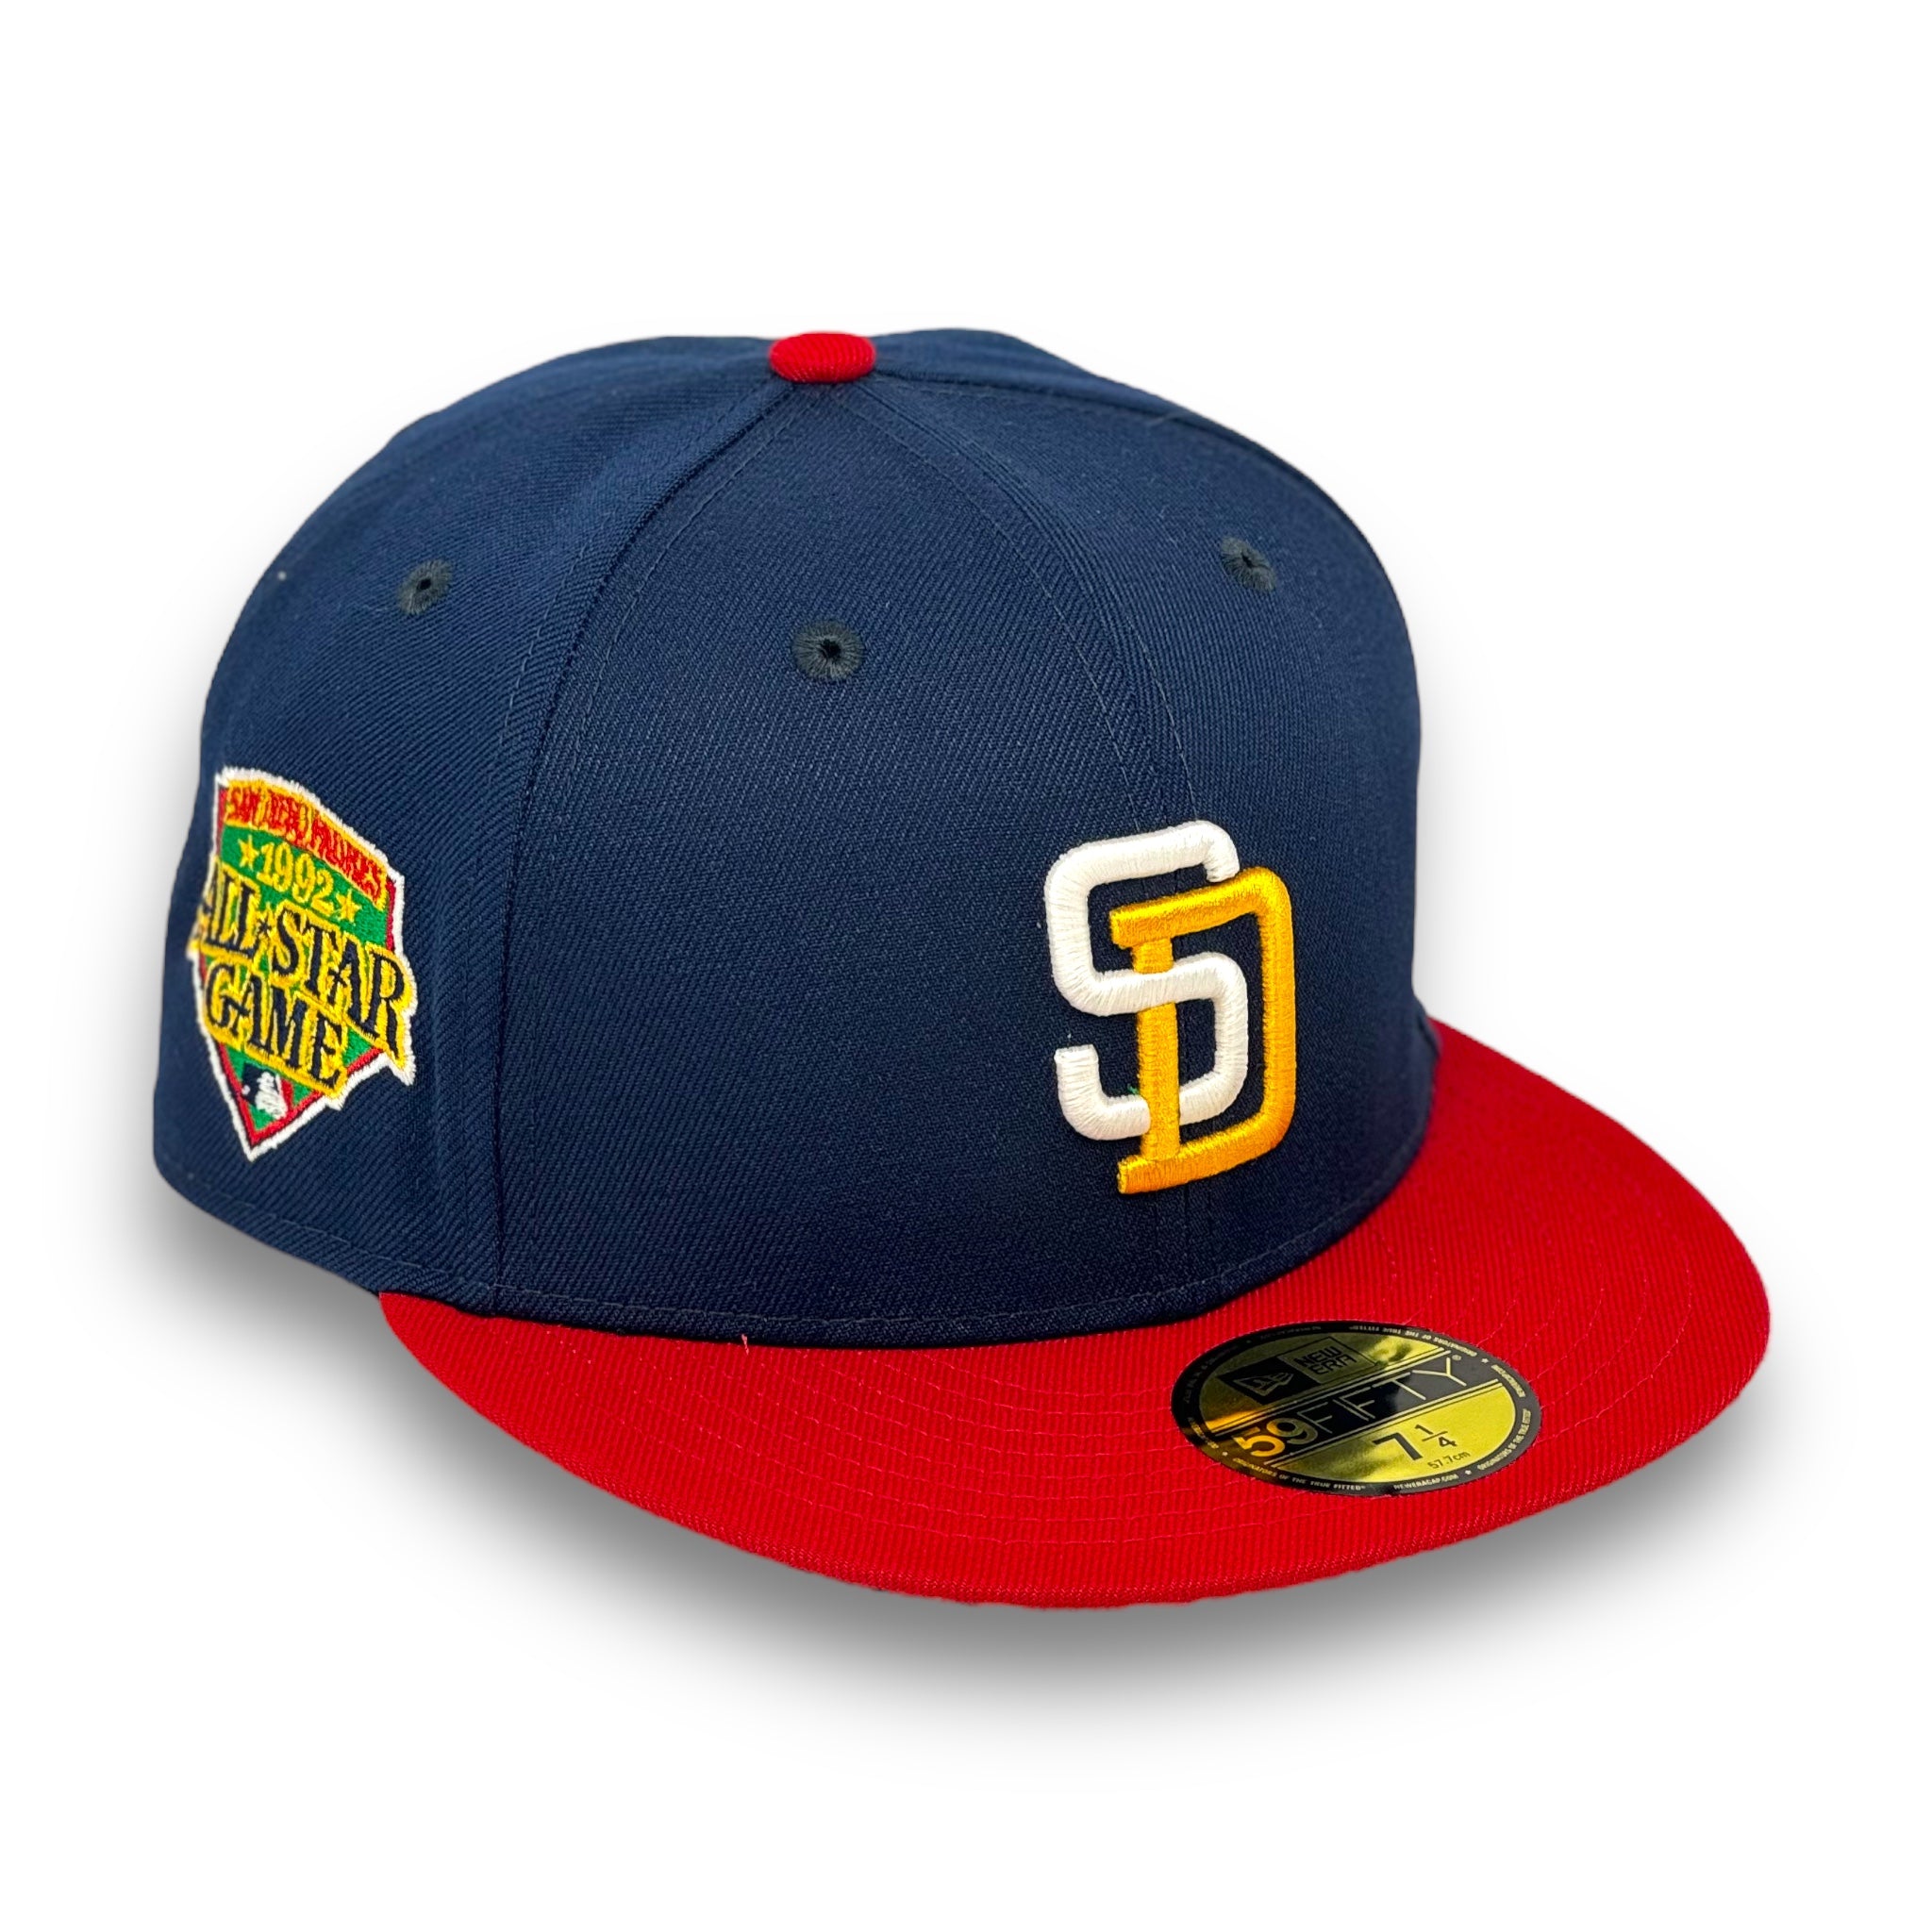 SAN DIEGO PADRES (NAVY/RED) (1992 ALLSTARGAME) NEW ERA 59FIFTY FITTED